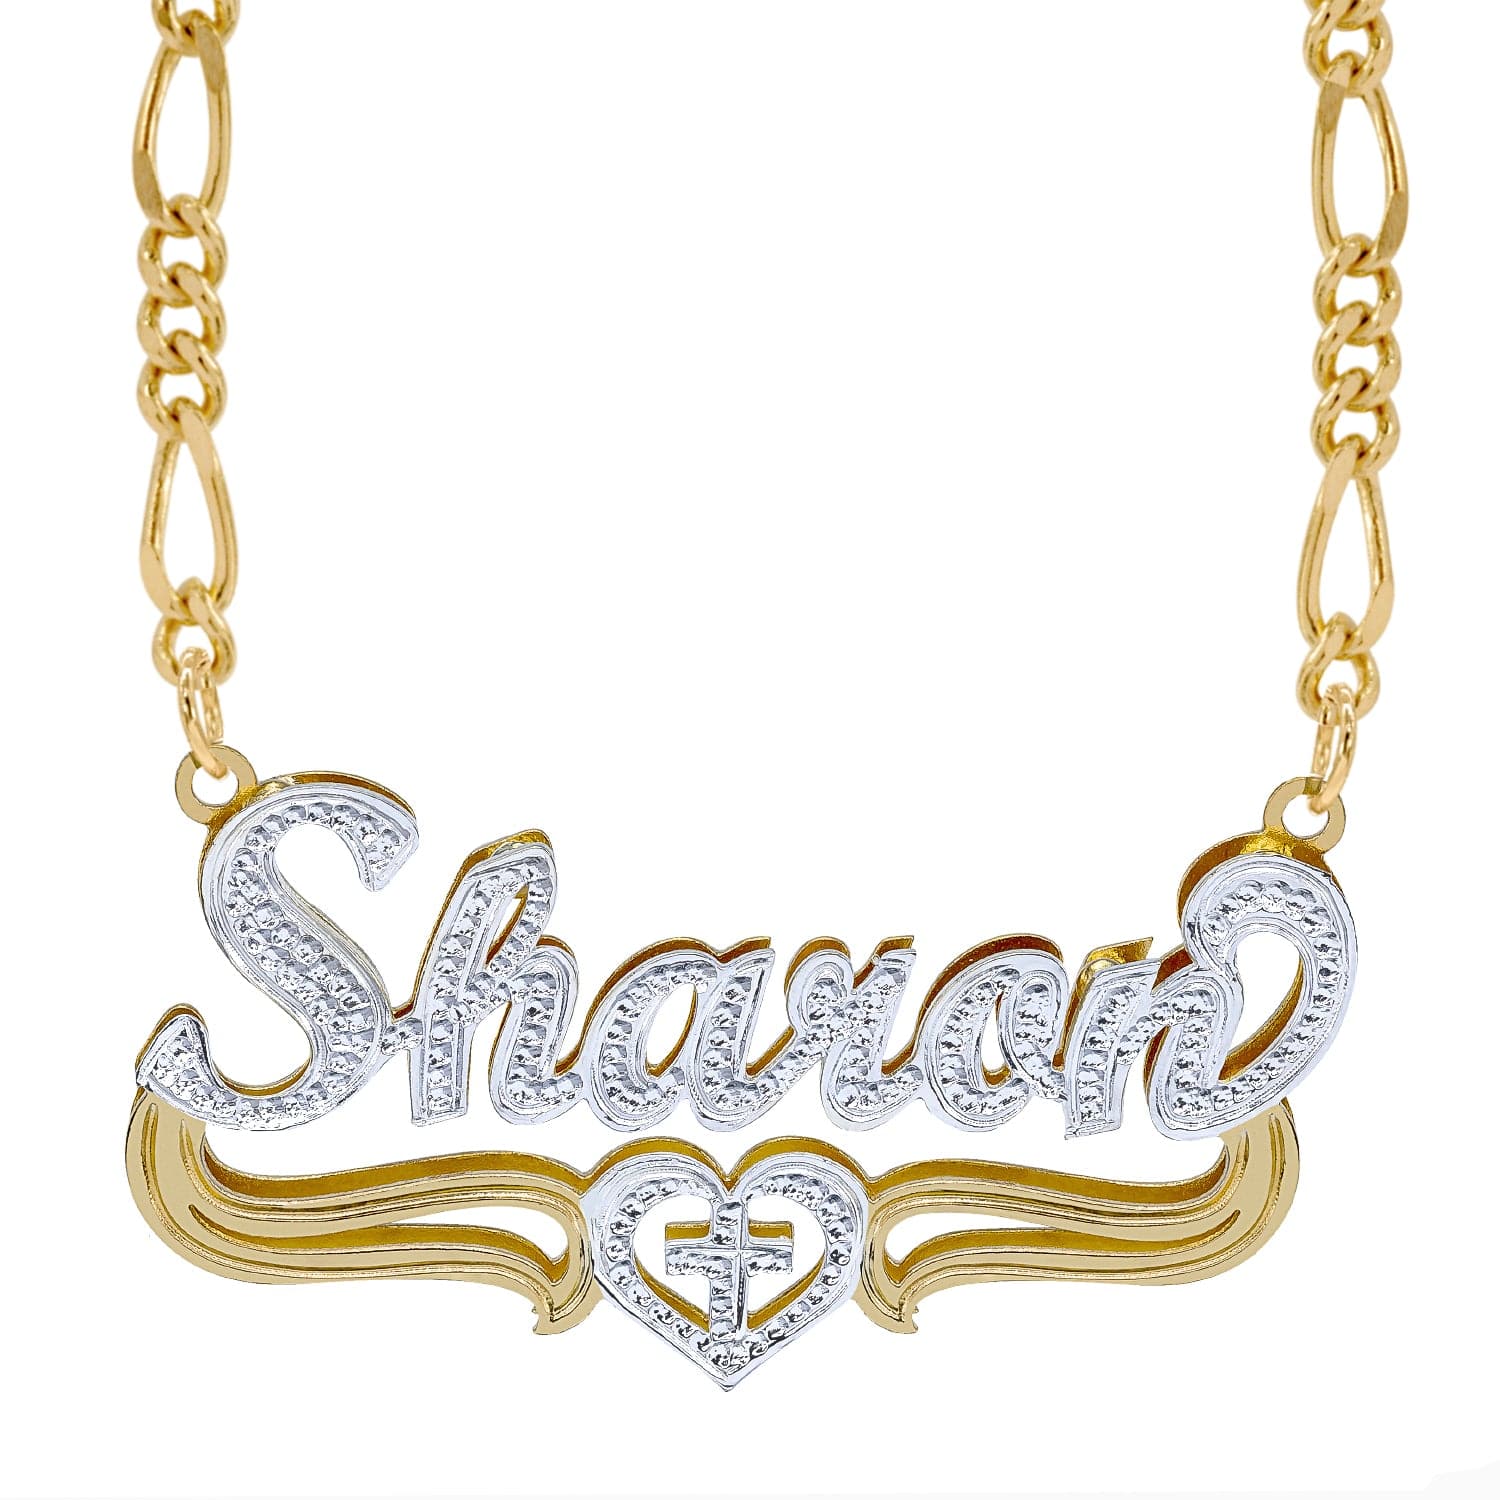 14k Gold over Sterling Silver / Figaro Chain Double Plated Nameplate Necklace "Sharon" with Figaro chain